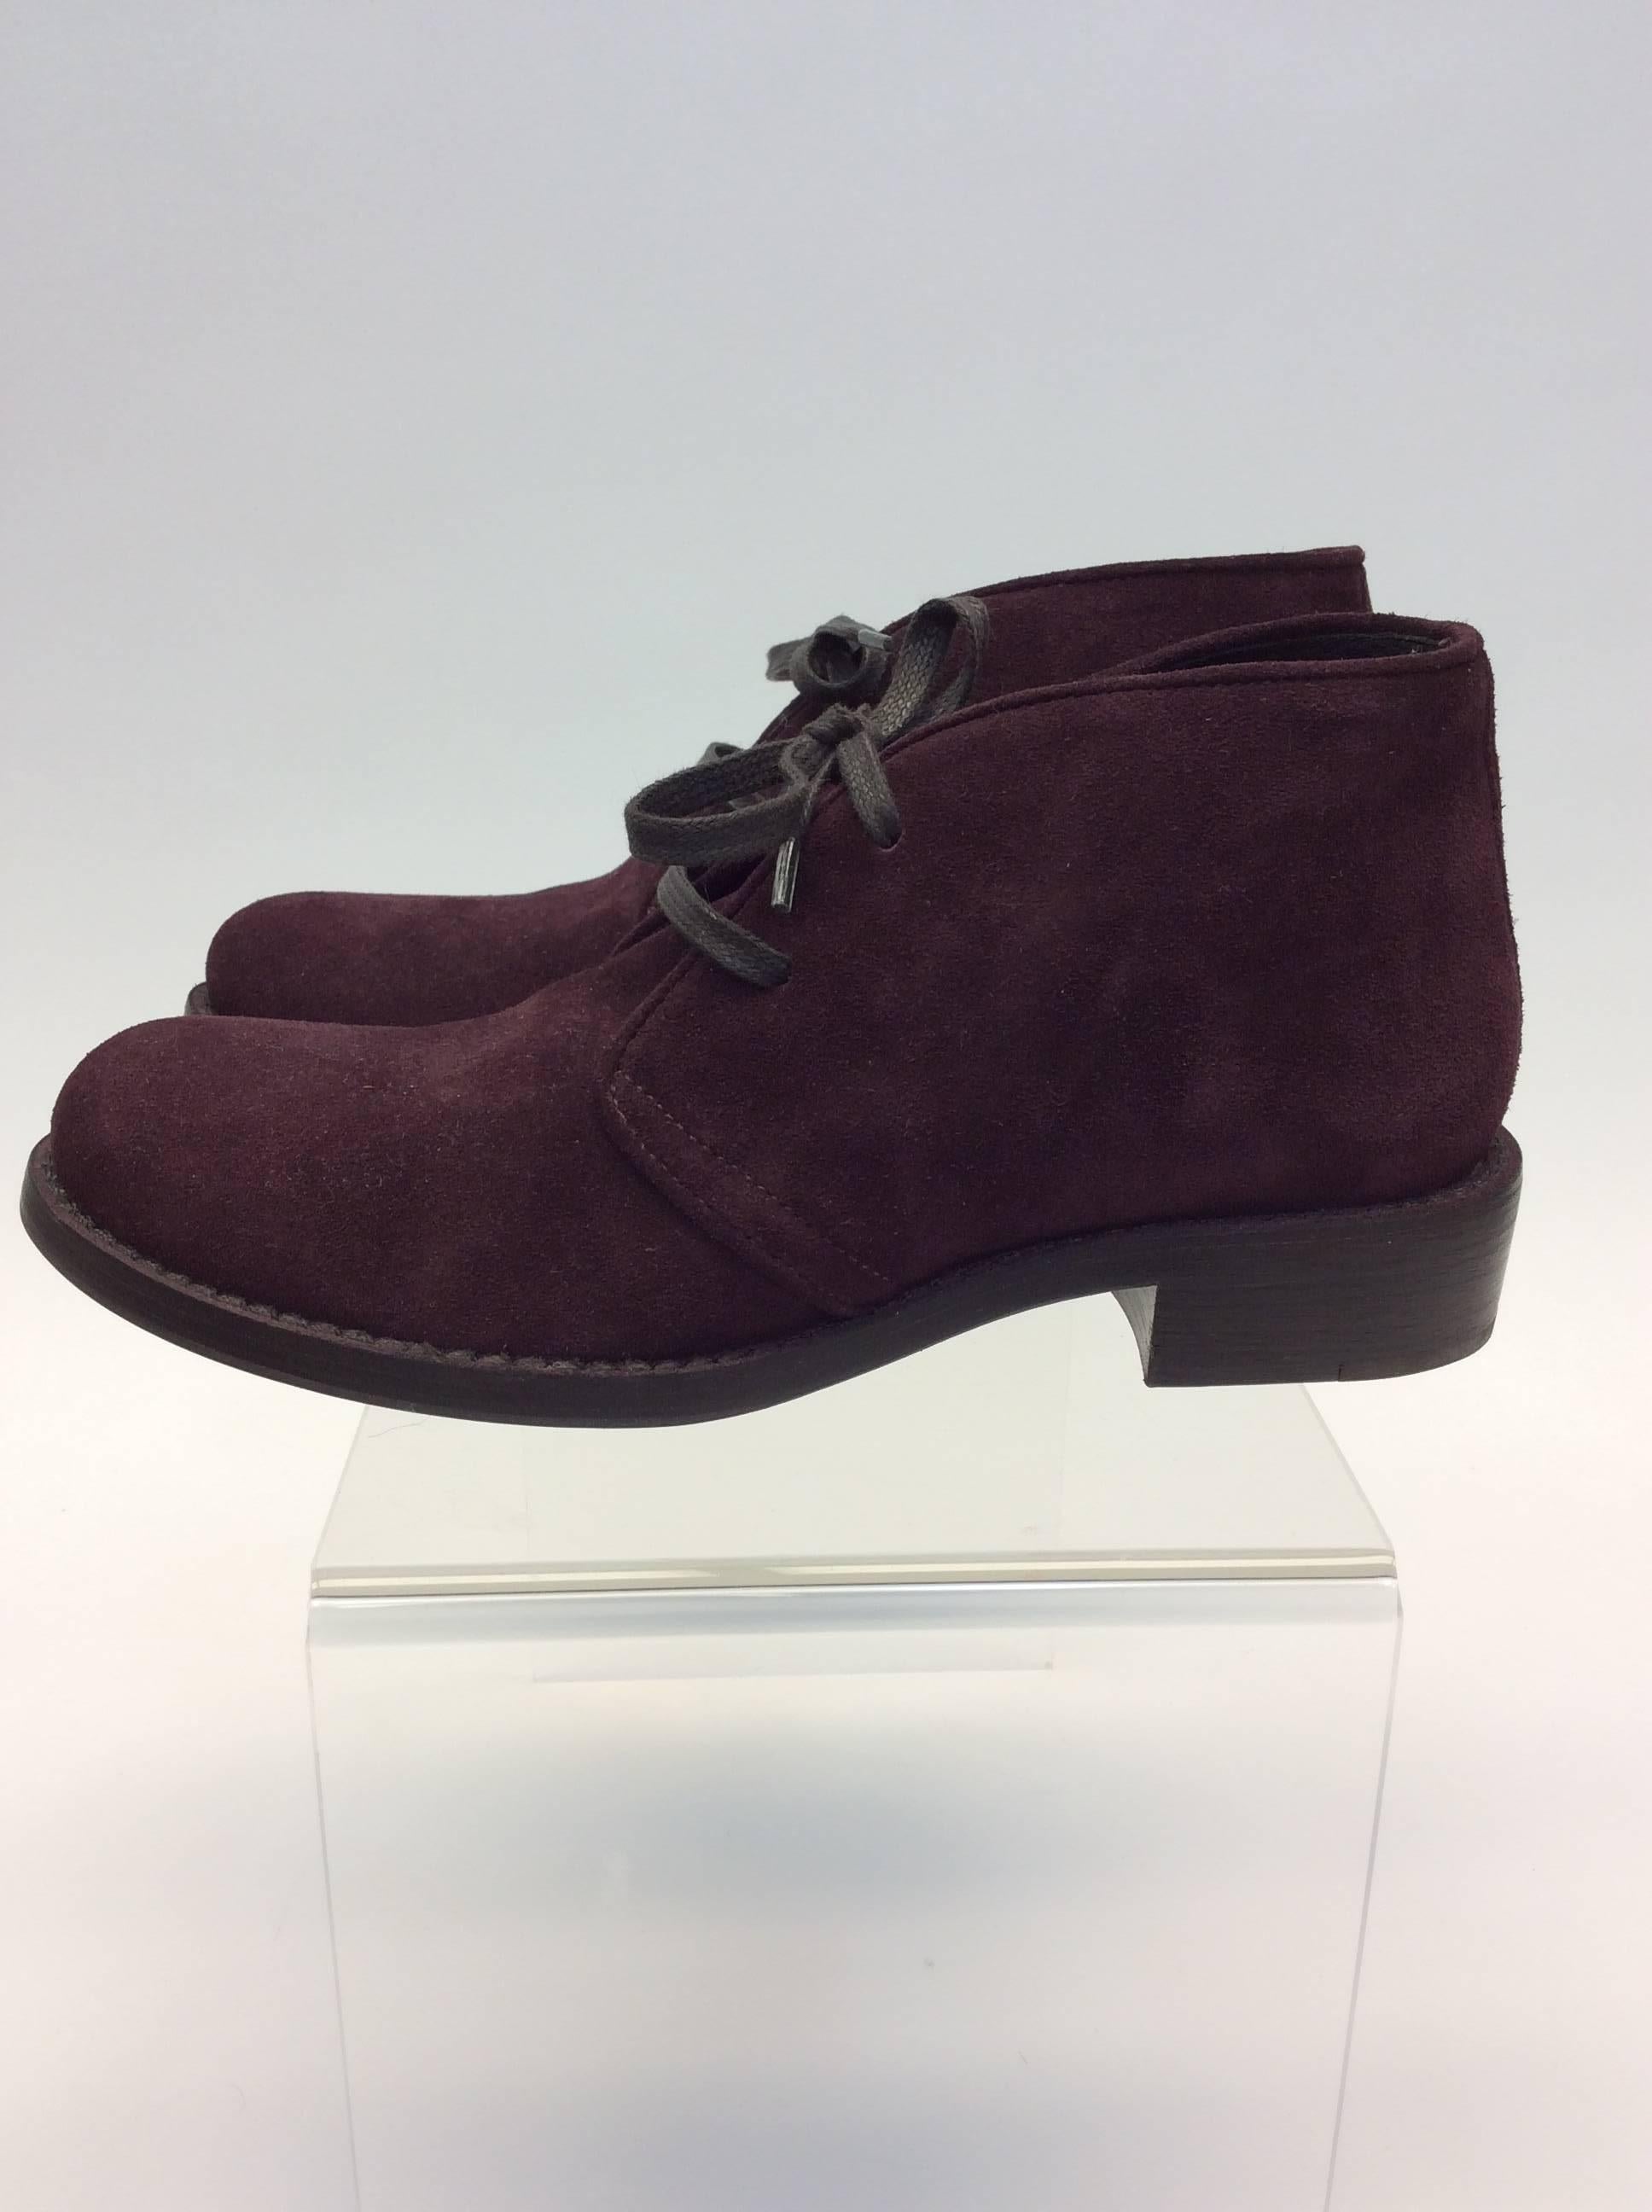 Bottega Veneta Maroon Suede Oxford Shoes In Excellent Condition For Sale In Narberth, PA